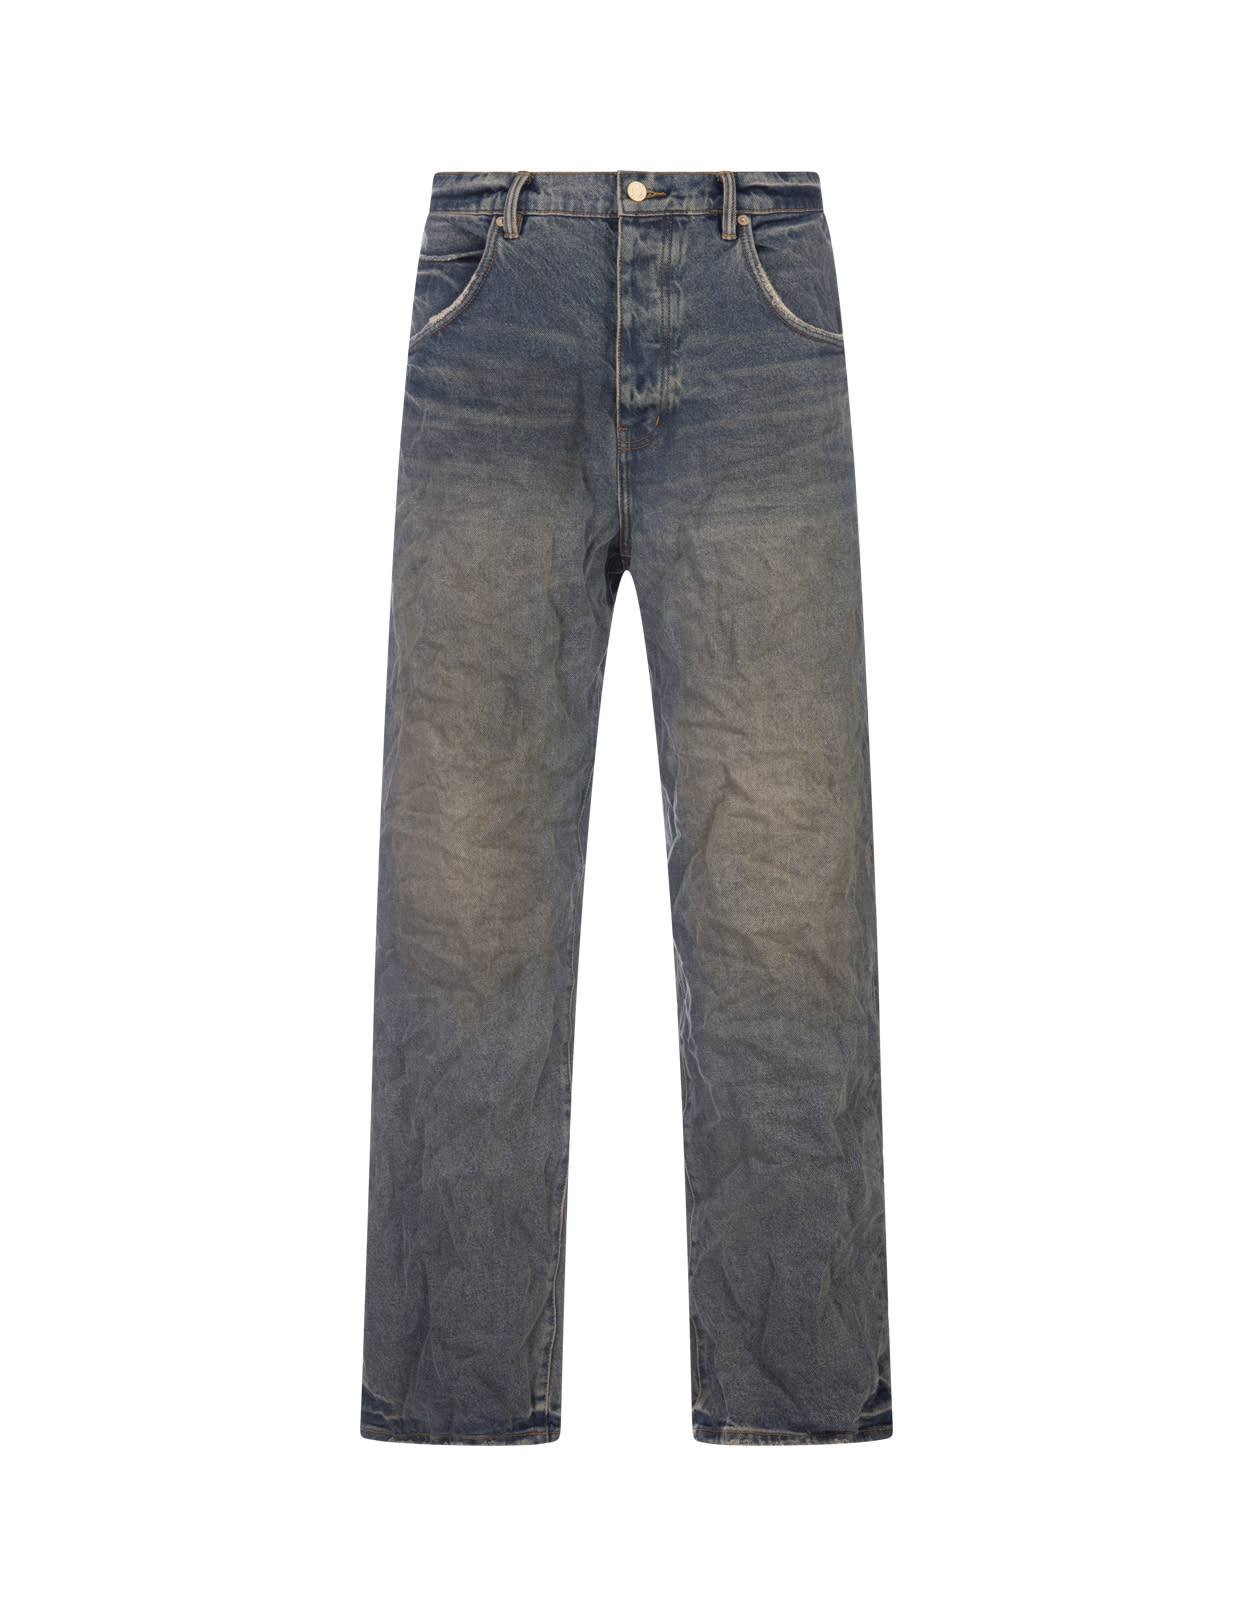 P018 Relaxed Vintage Dirty Jeans In Light Indigo